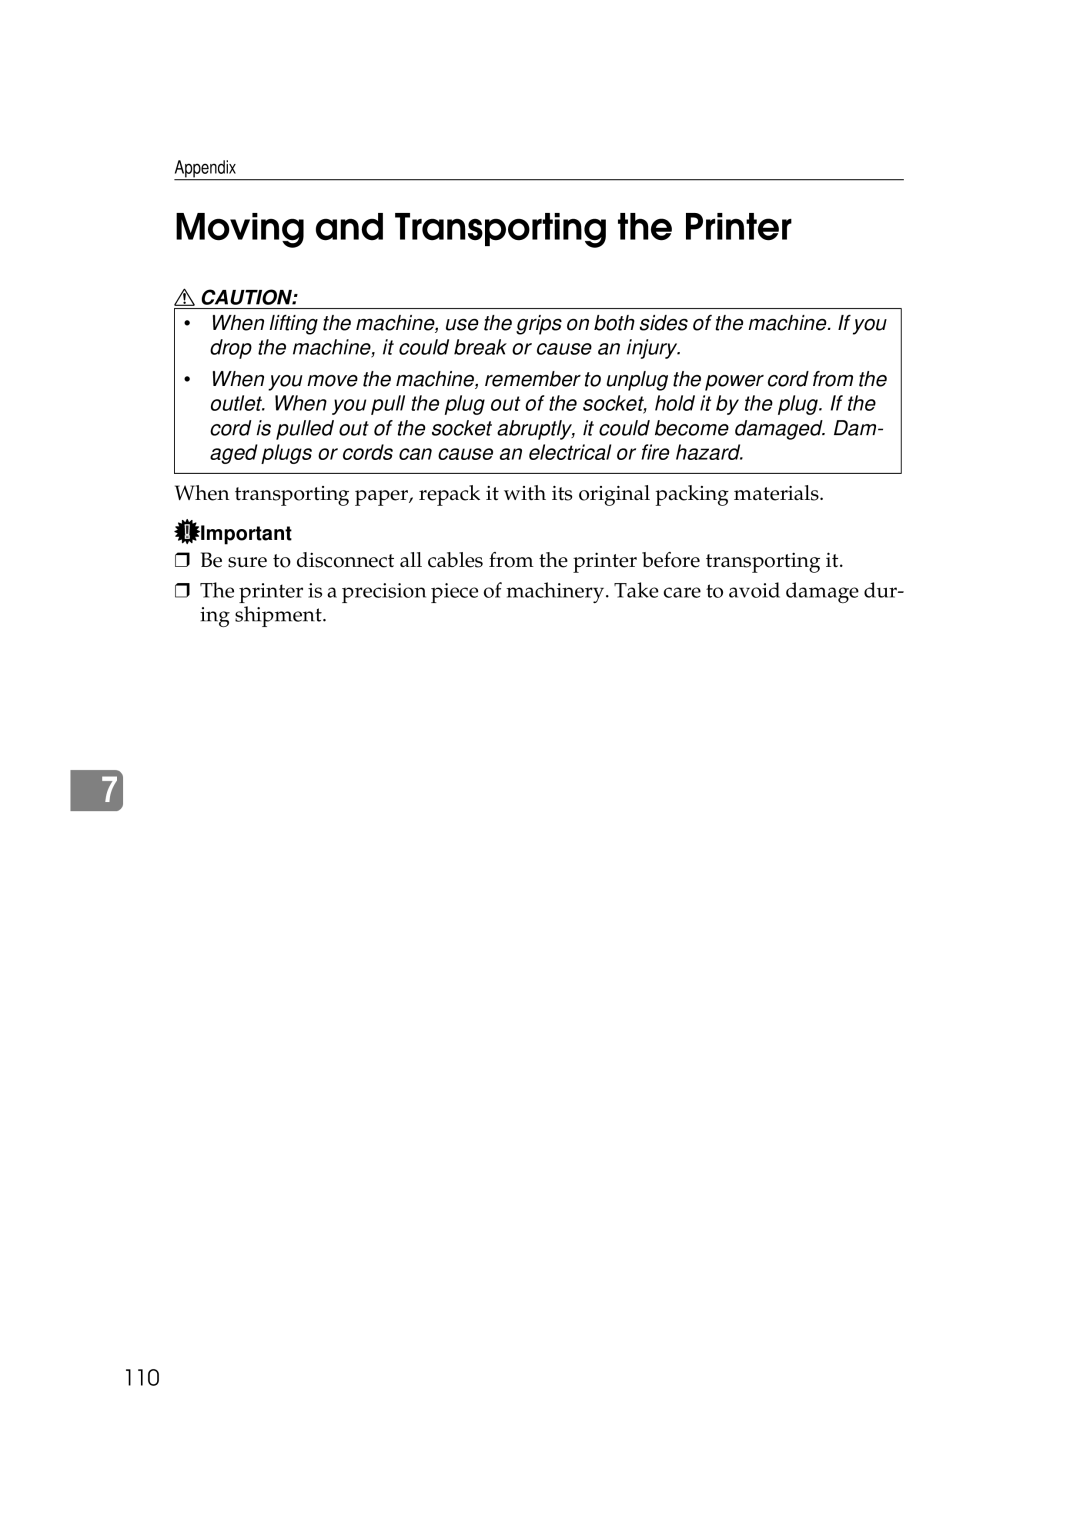 Ricoh Aficio AP2700 operating instructions Moving and Transporting the Printer, Appendix 